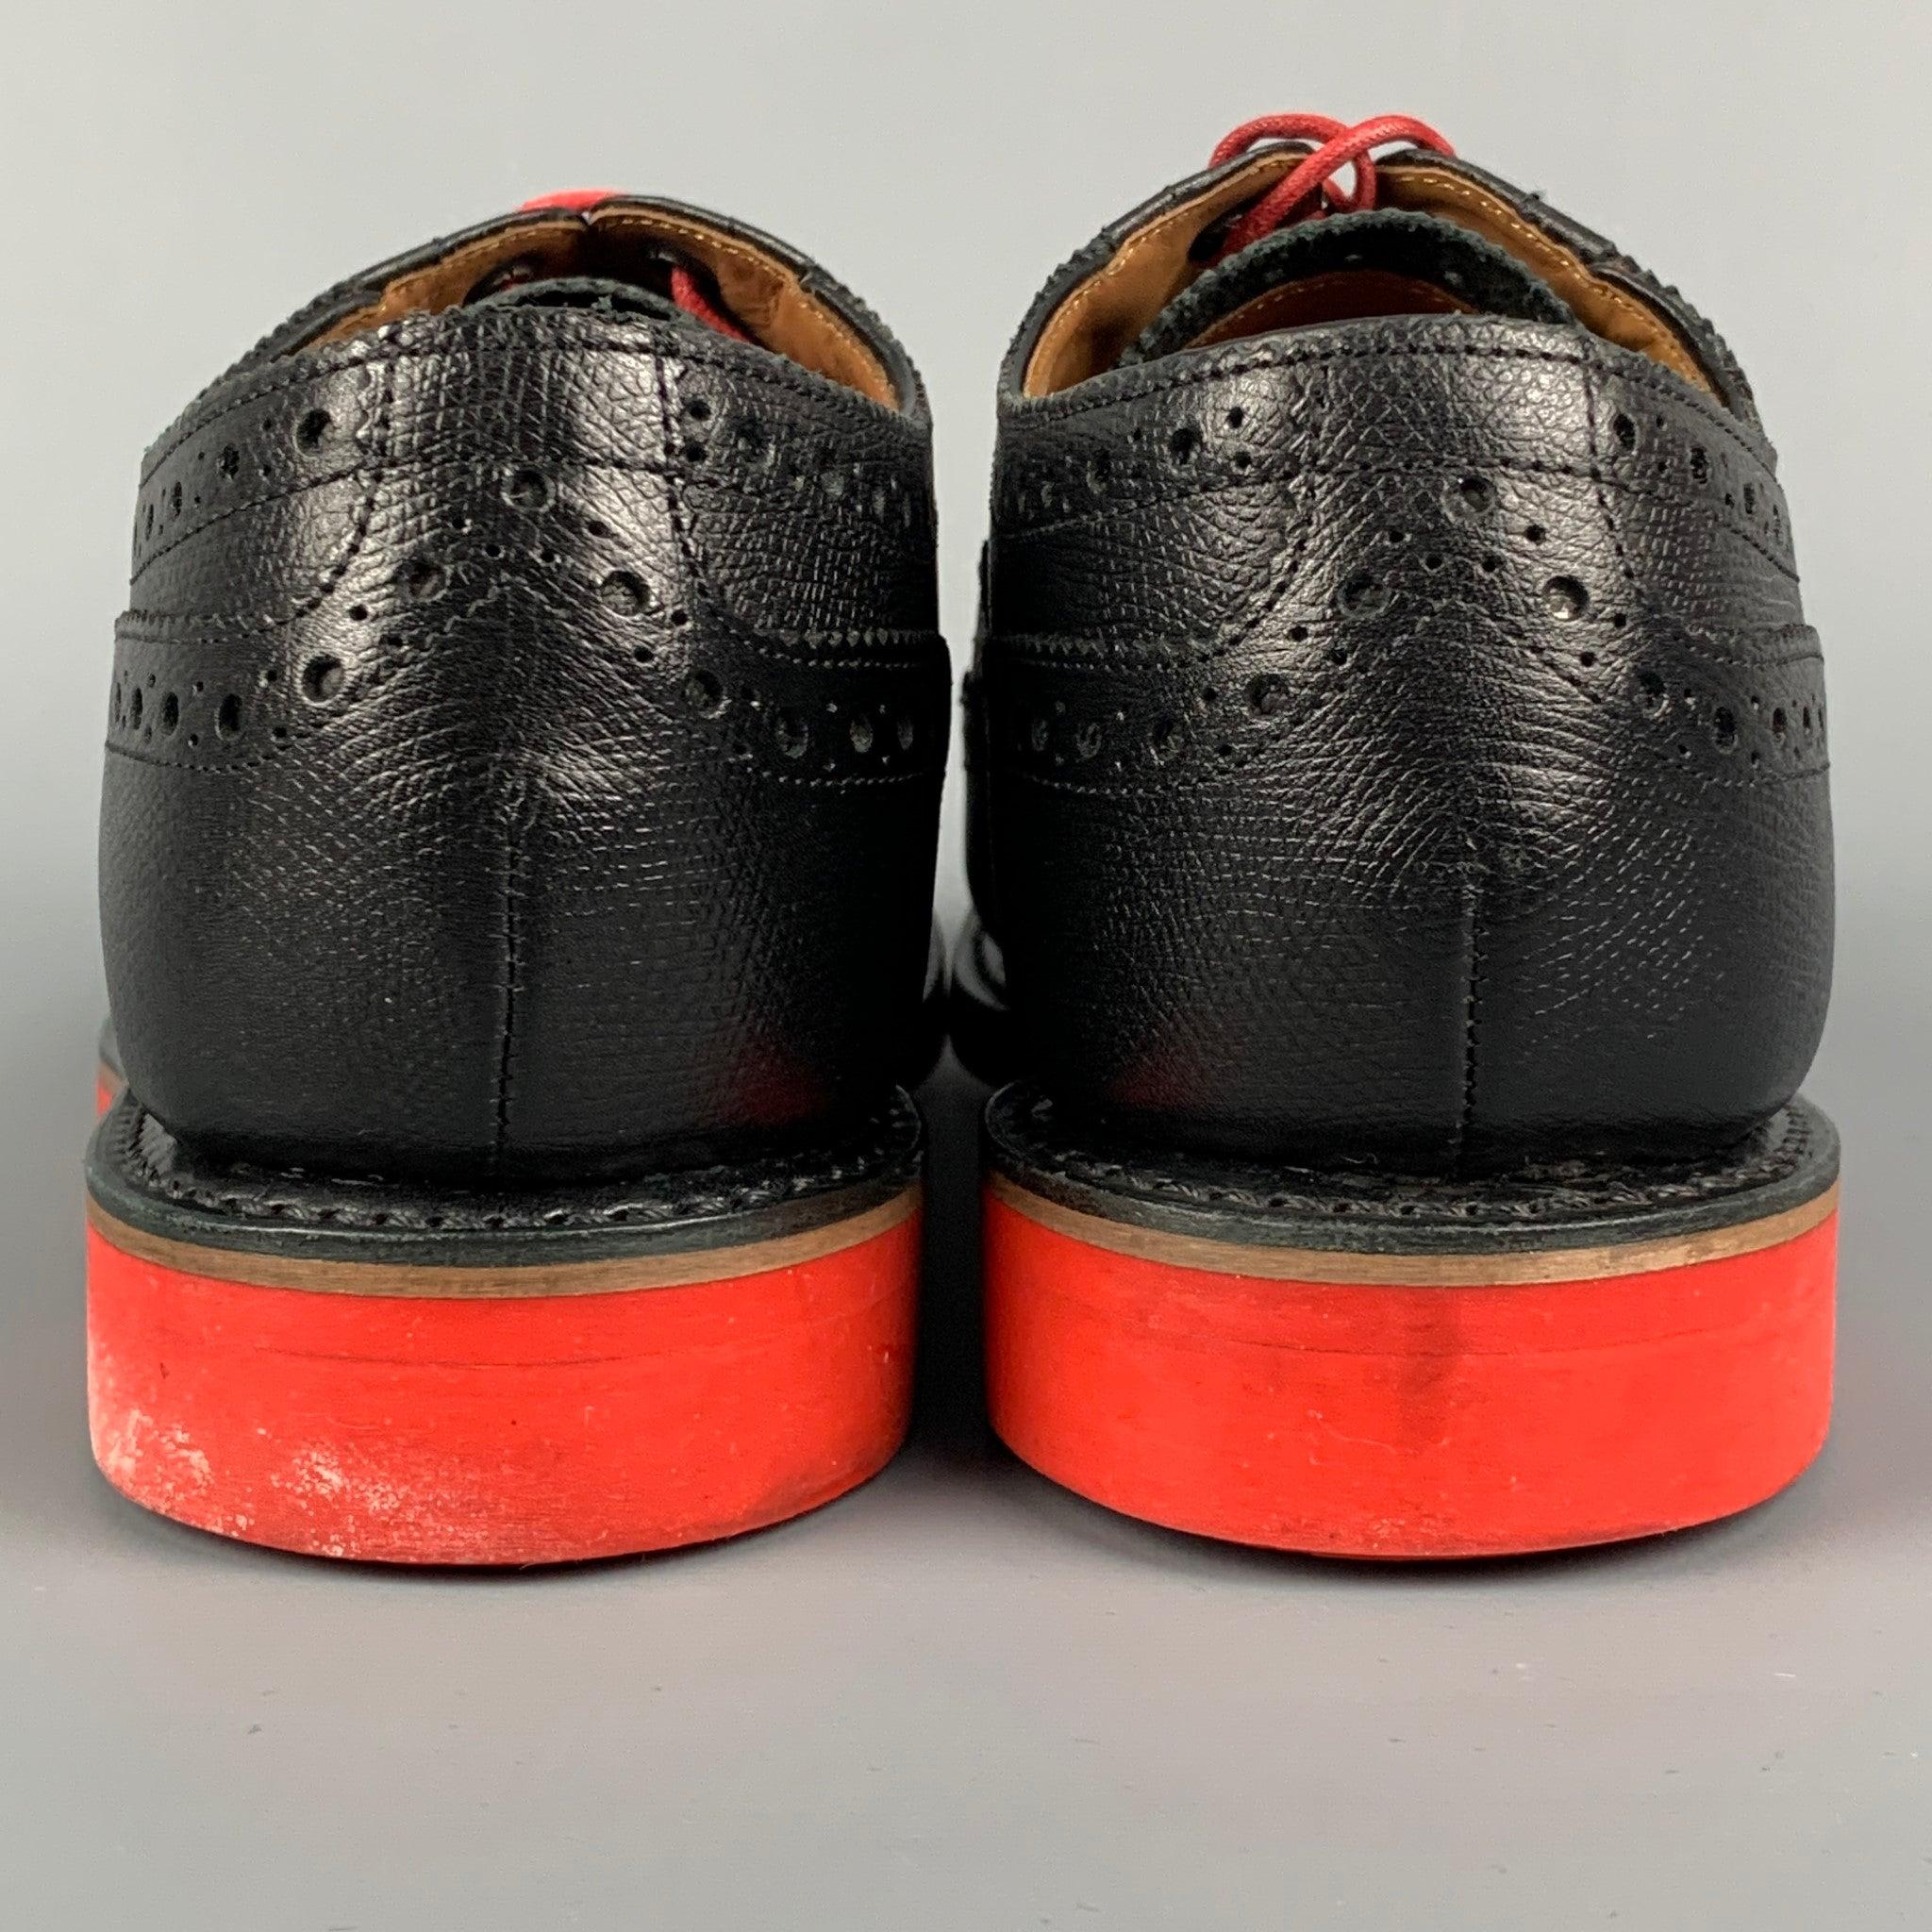 GRENSON Size 8.5 Black & Red Perforated Leather Wingtip Lace Up Shoes For Sale 1